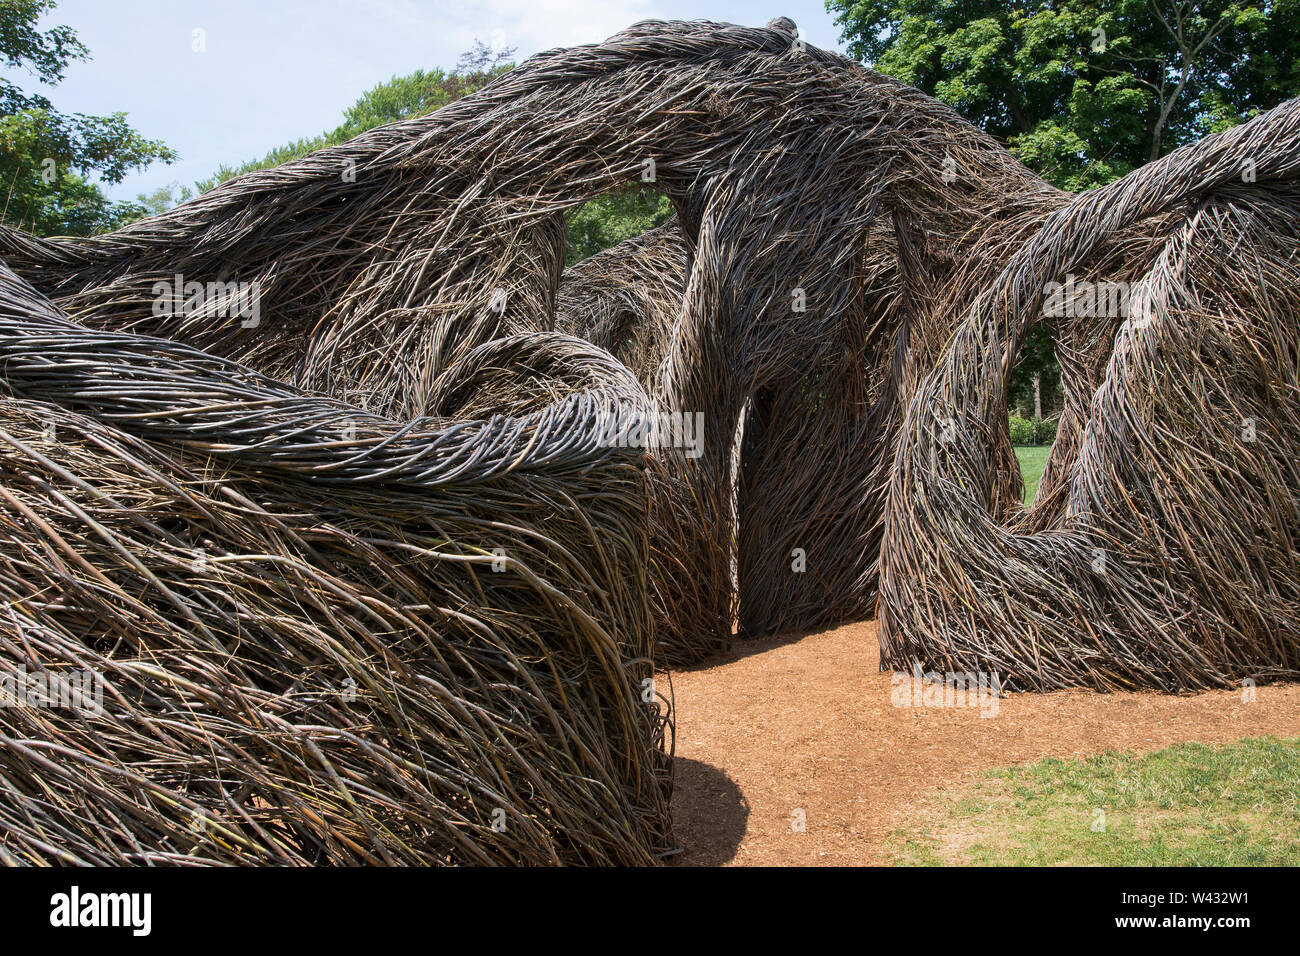 'Stickwork' a sculpture by artist Patrick Dougherty on display at Highfield, a historic summer mansion in Falmouth, Massachusetts on Cape Cod. Stock Photo